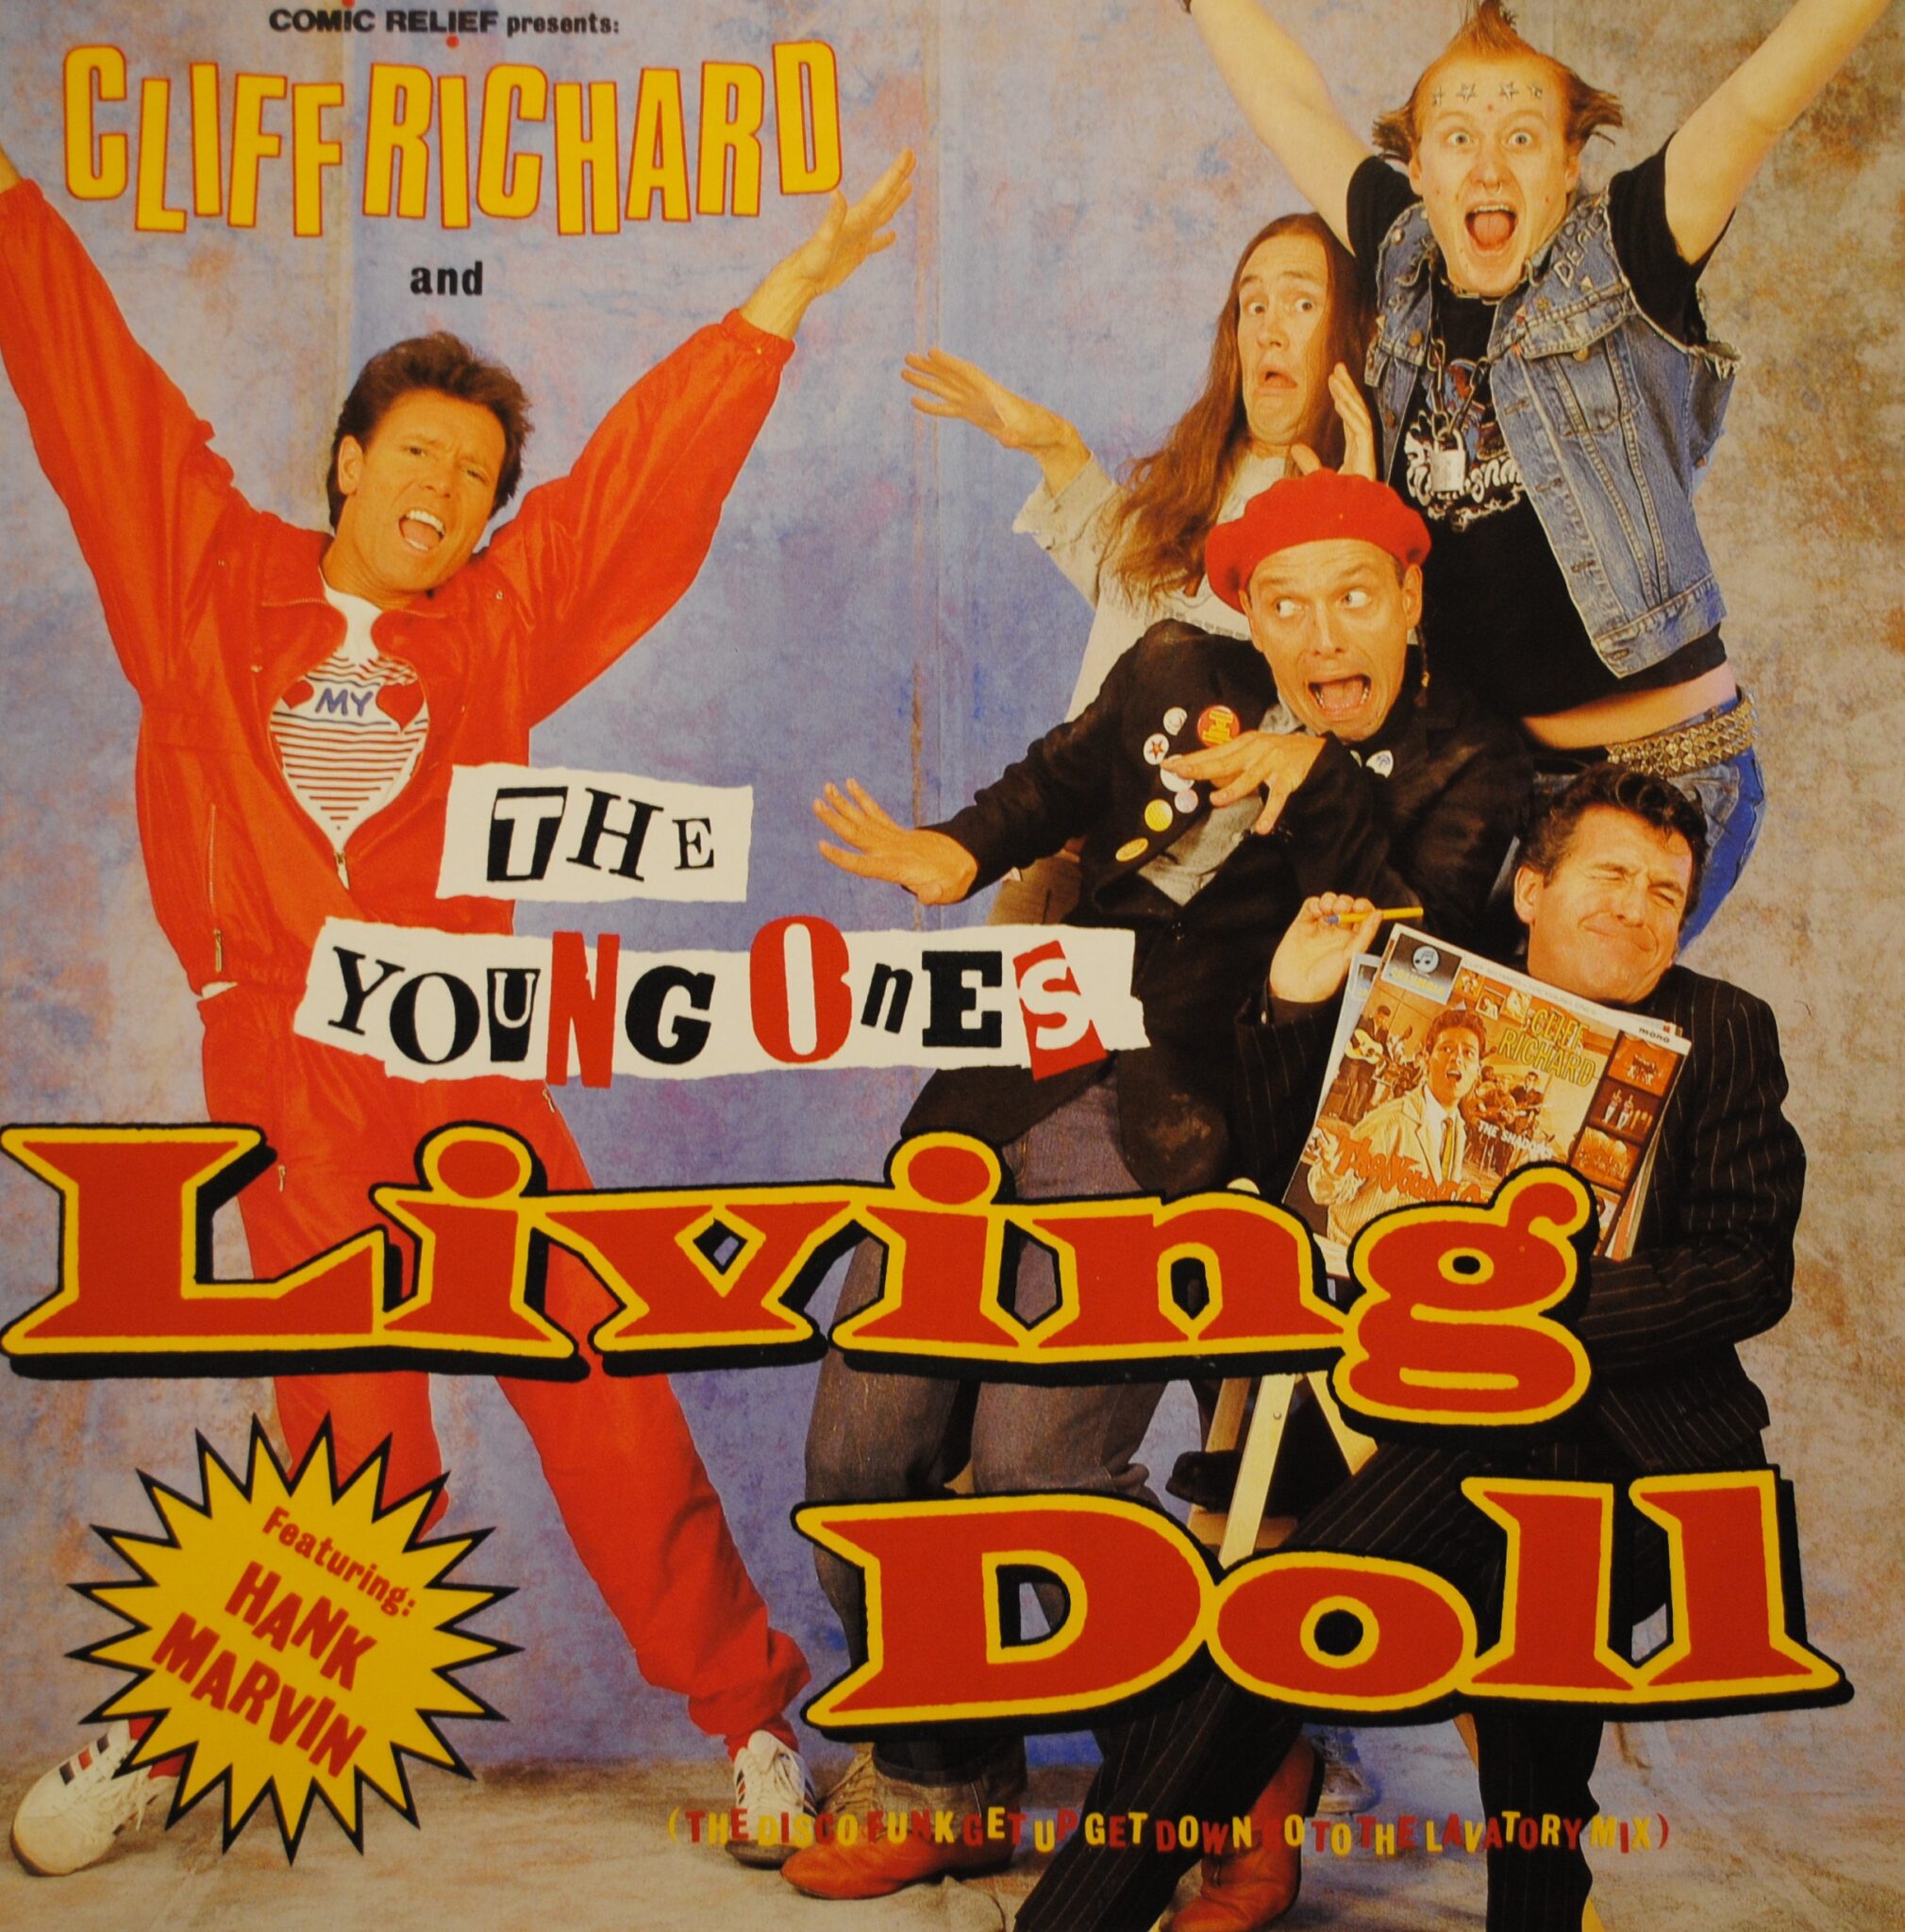 Cliff richard the young ones